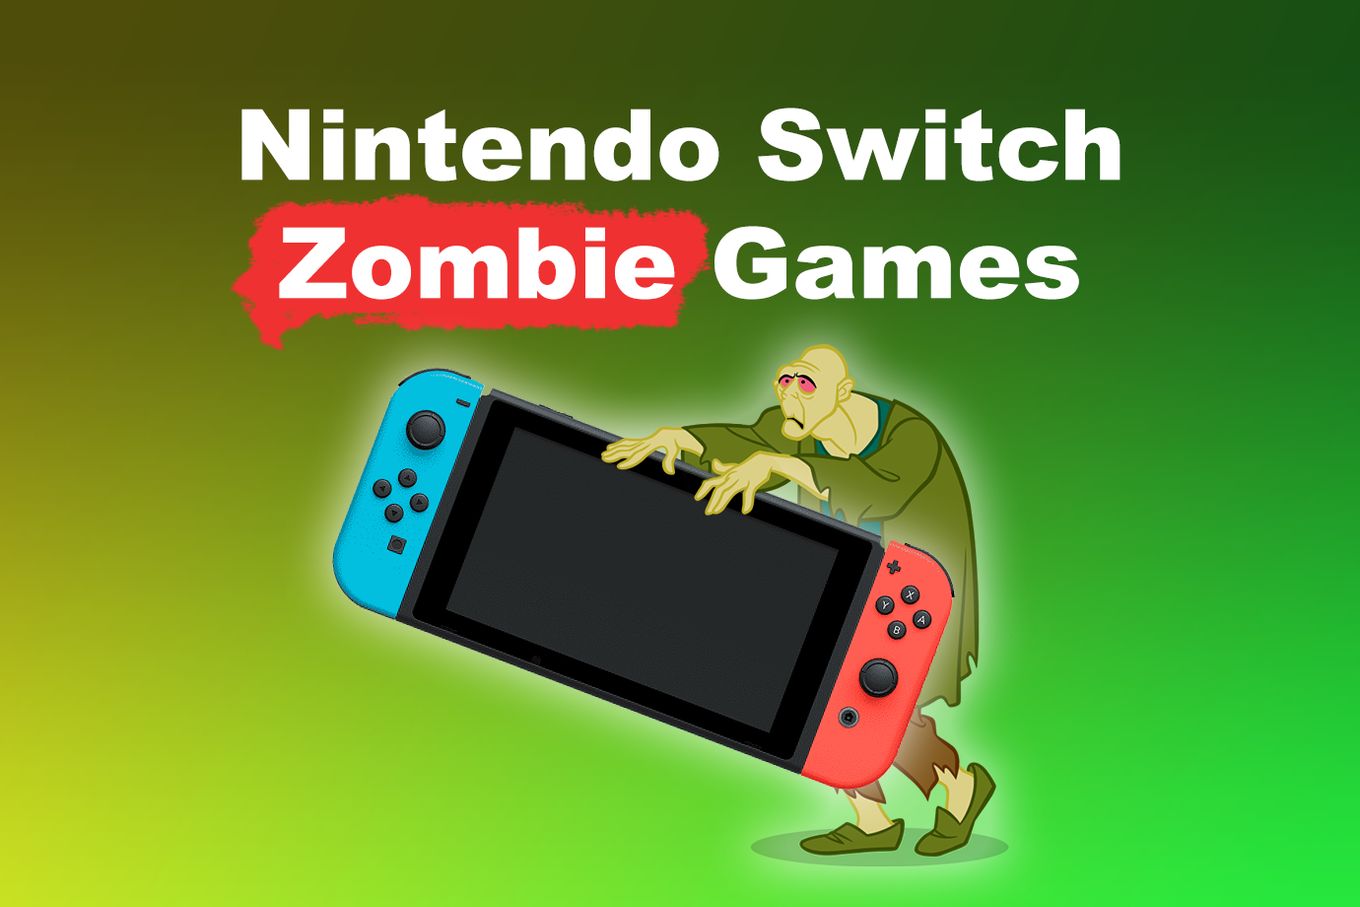 23 Top Nintendo Switch Zombie Games Ranked and Reviewed